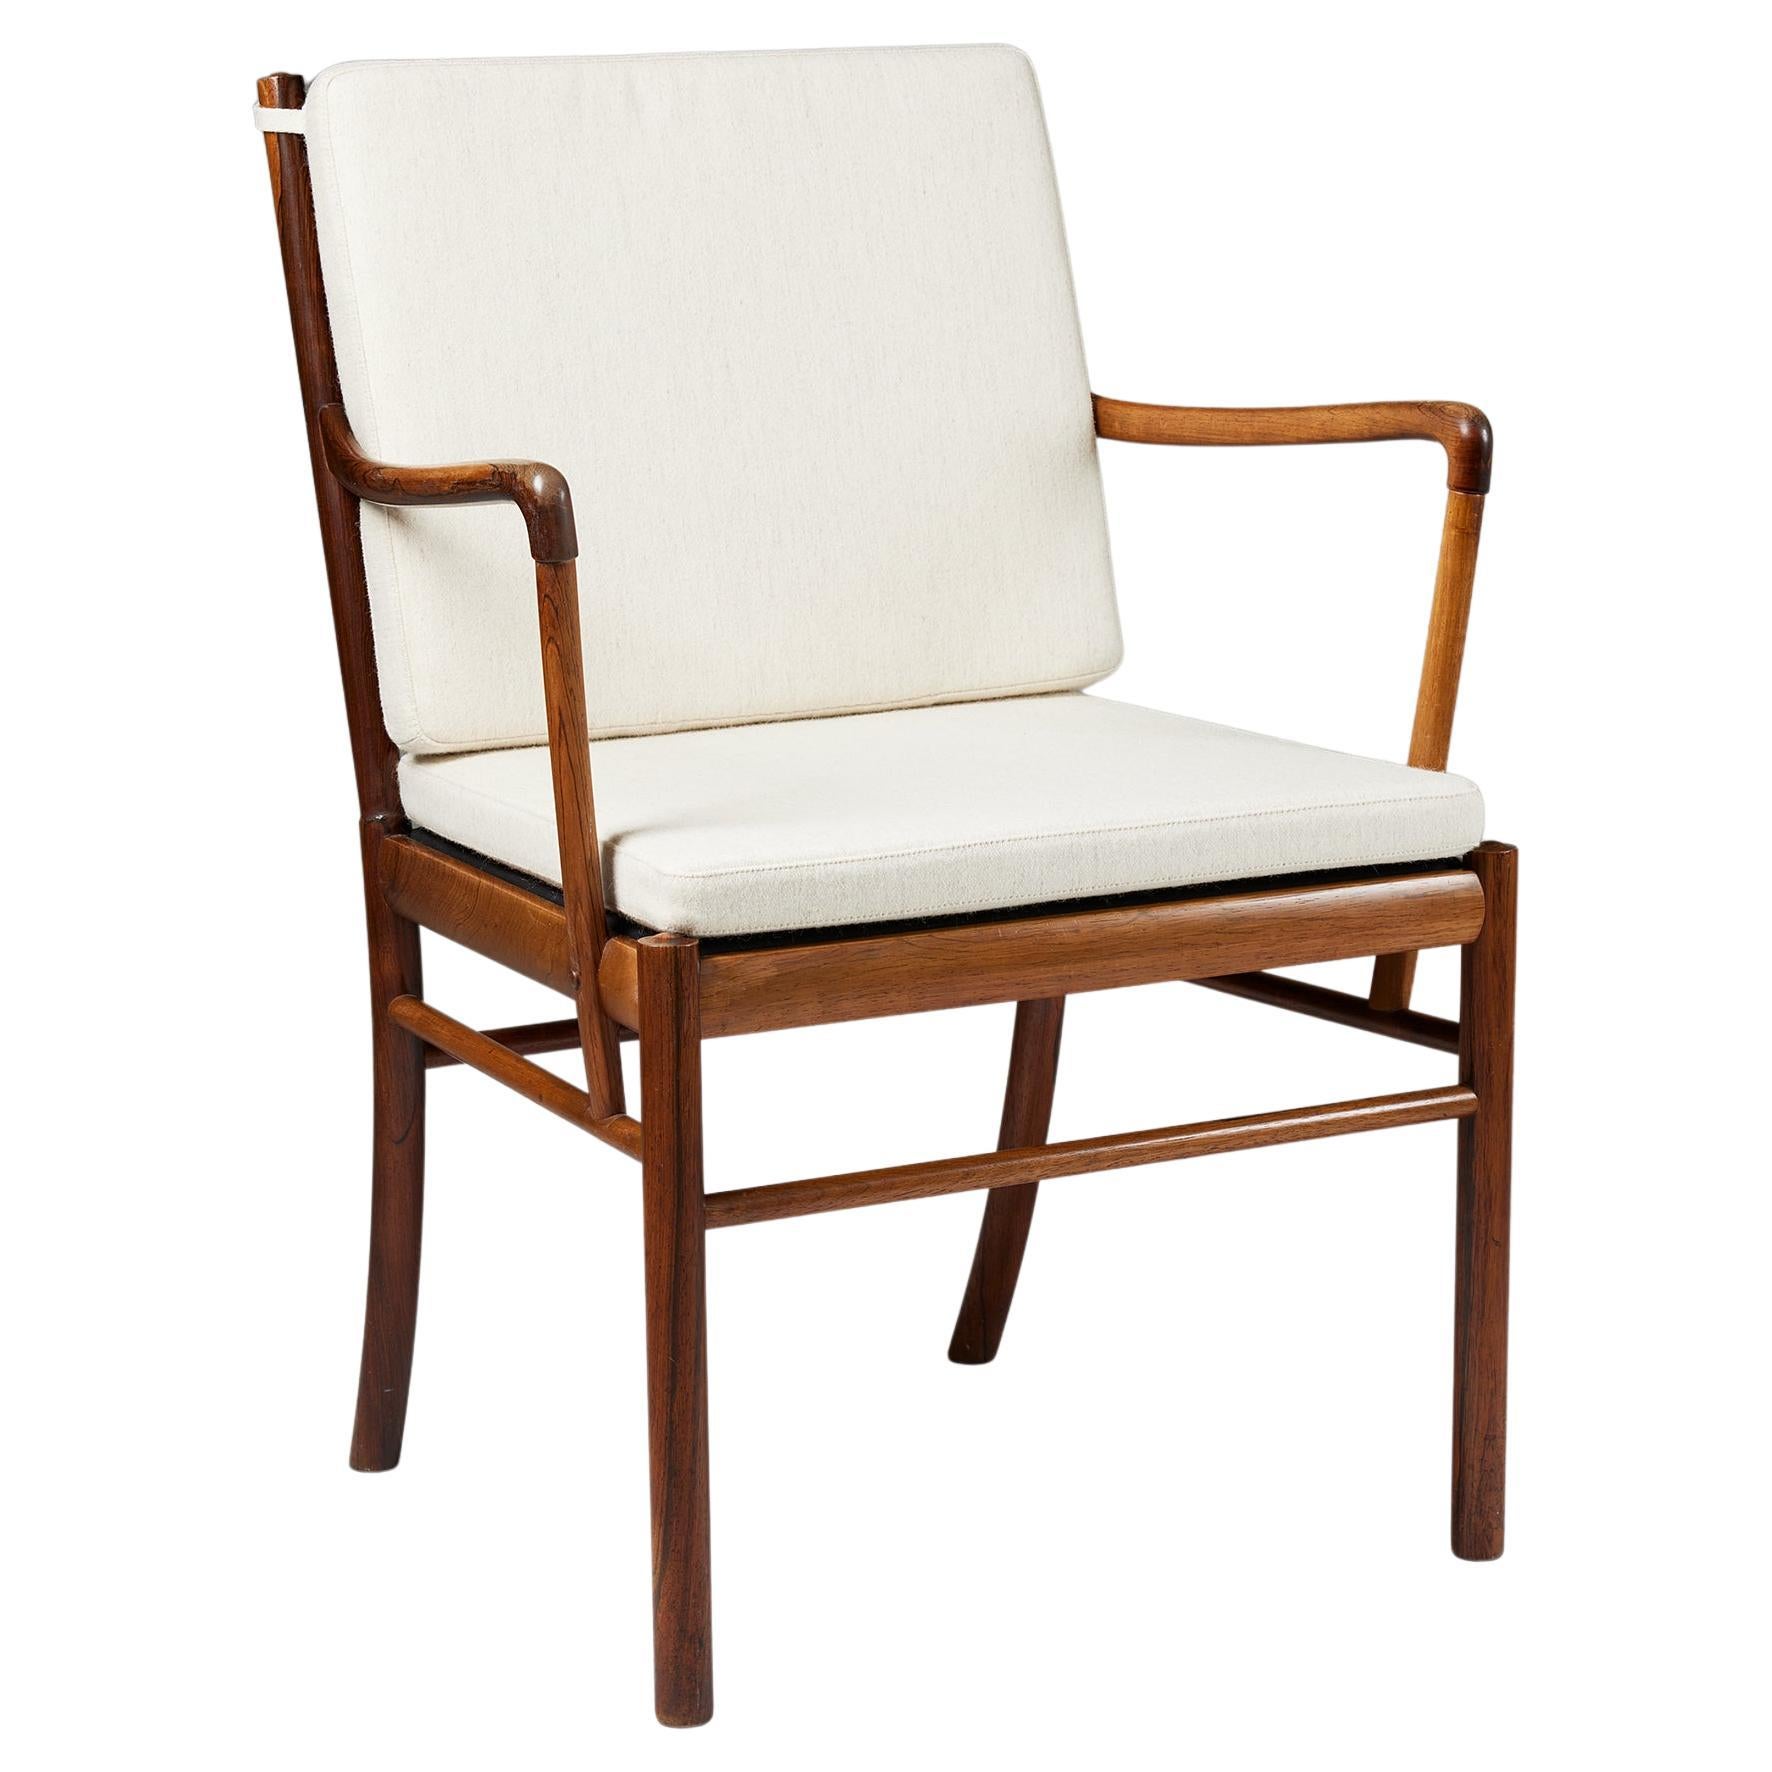 Armchair ‘Colonial’ Designed by Ole Wanscher for Poul Jeppesen